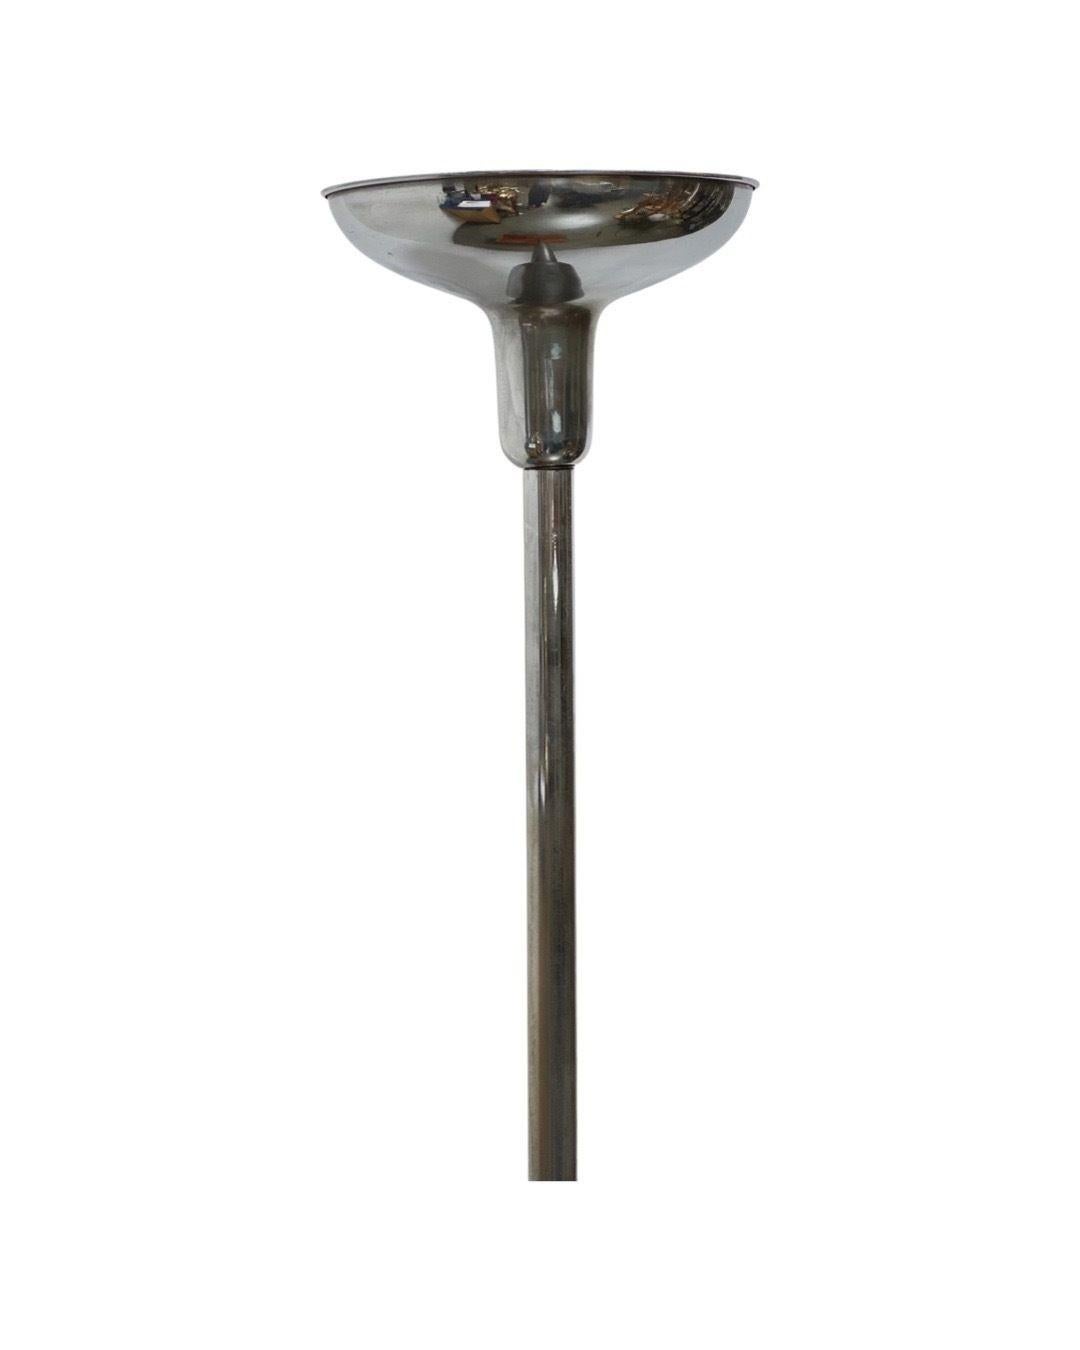 American Art Deco Chrome & Wood Torchiere Floor Lamp End Table For Sale